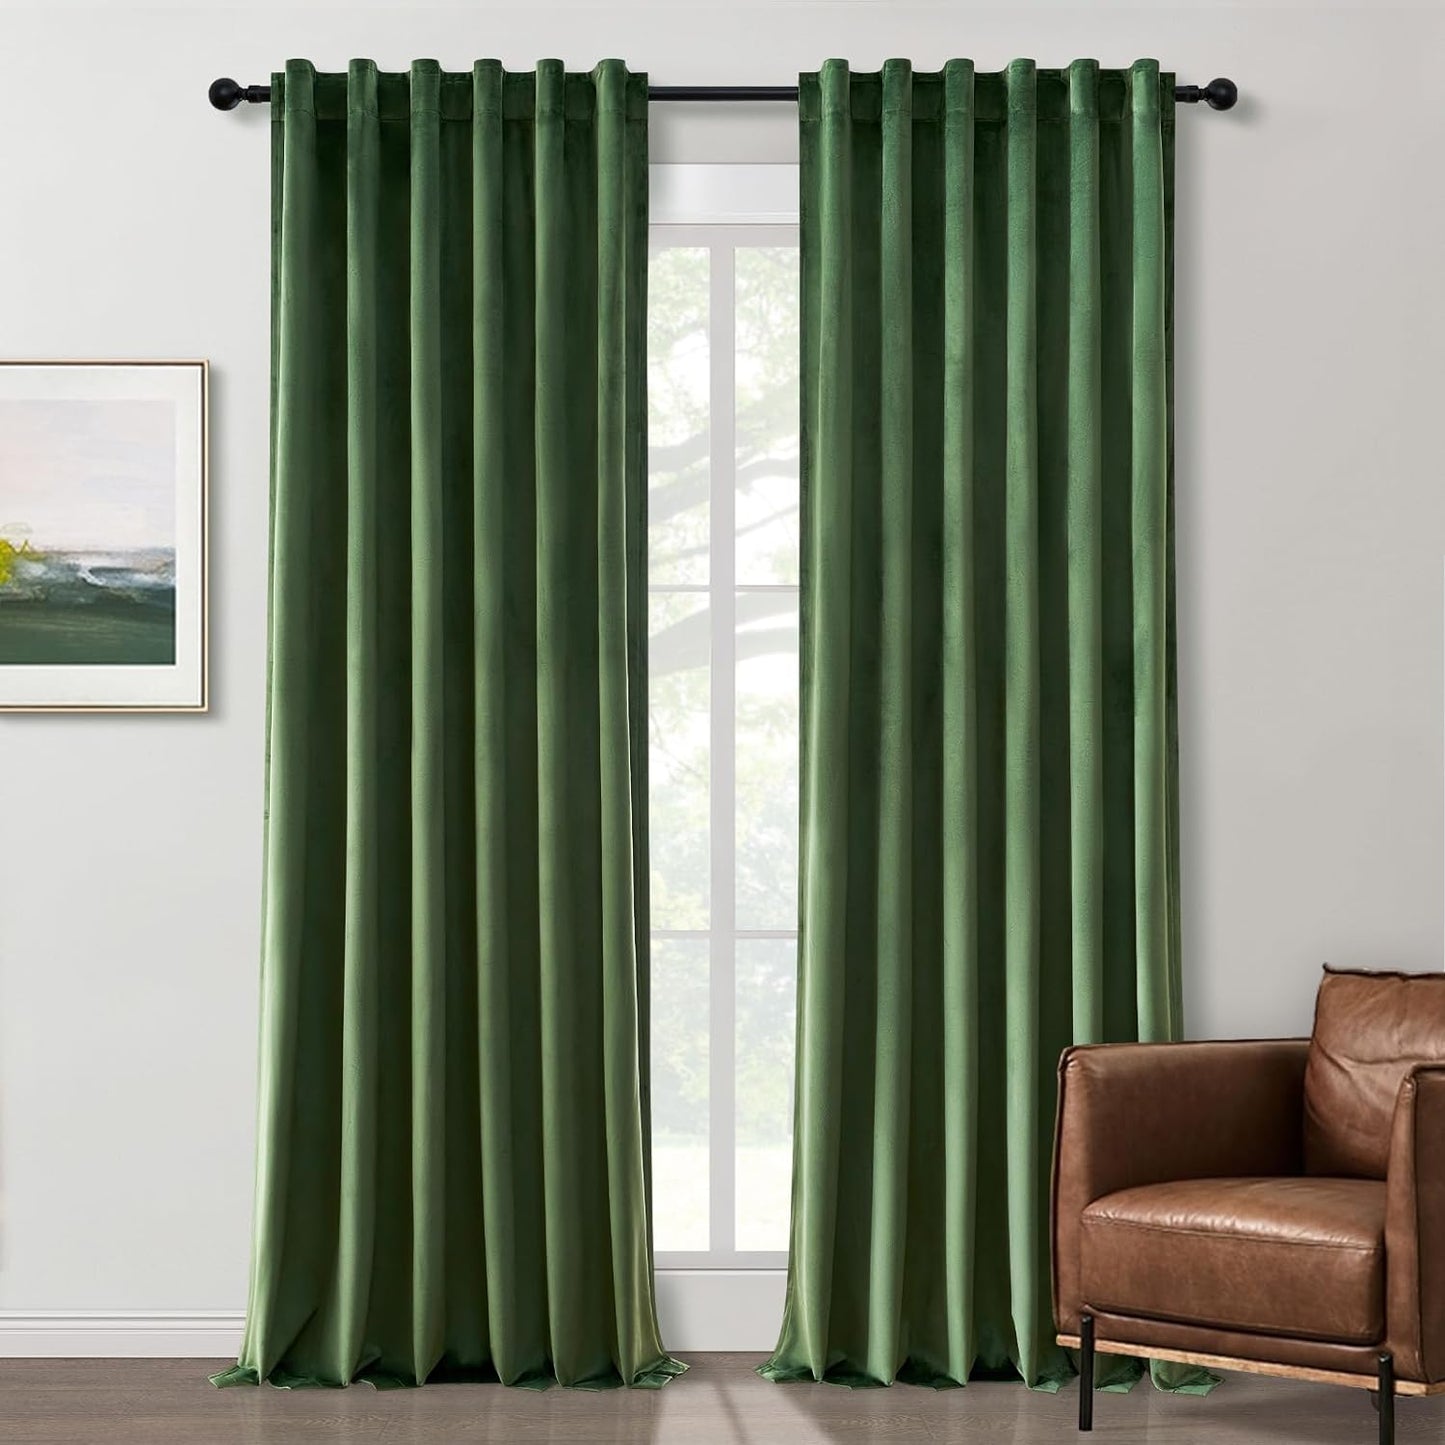 Topfinel Olive Green Velvet Curtains 84 Inches Long for Living Room,Blackout Thermal Insulated Curtains for Bedroom,Back Tab Modern Window Treatment for Living Room,52X84 Inch Length,Olive Green  Top Fine Moss Green 52" X 84" 